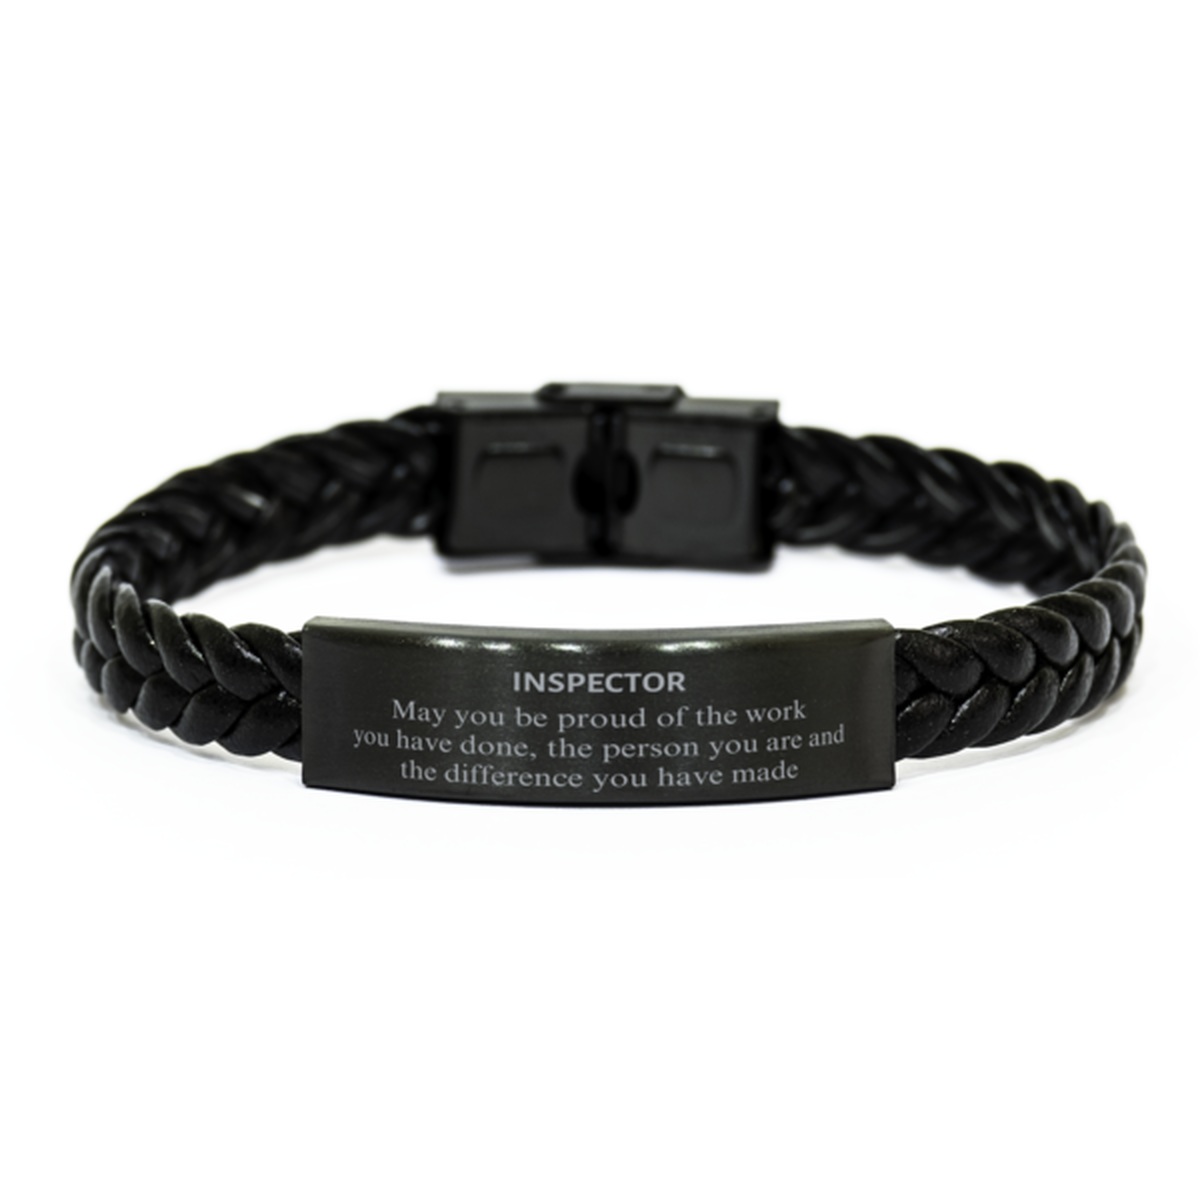 Inspector May you be proud of the work you have done, Retirement Inspector Braided Leather Bracelet for Colleague Appreciation Gifts Amazing for Inspector